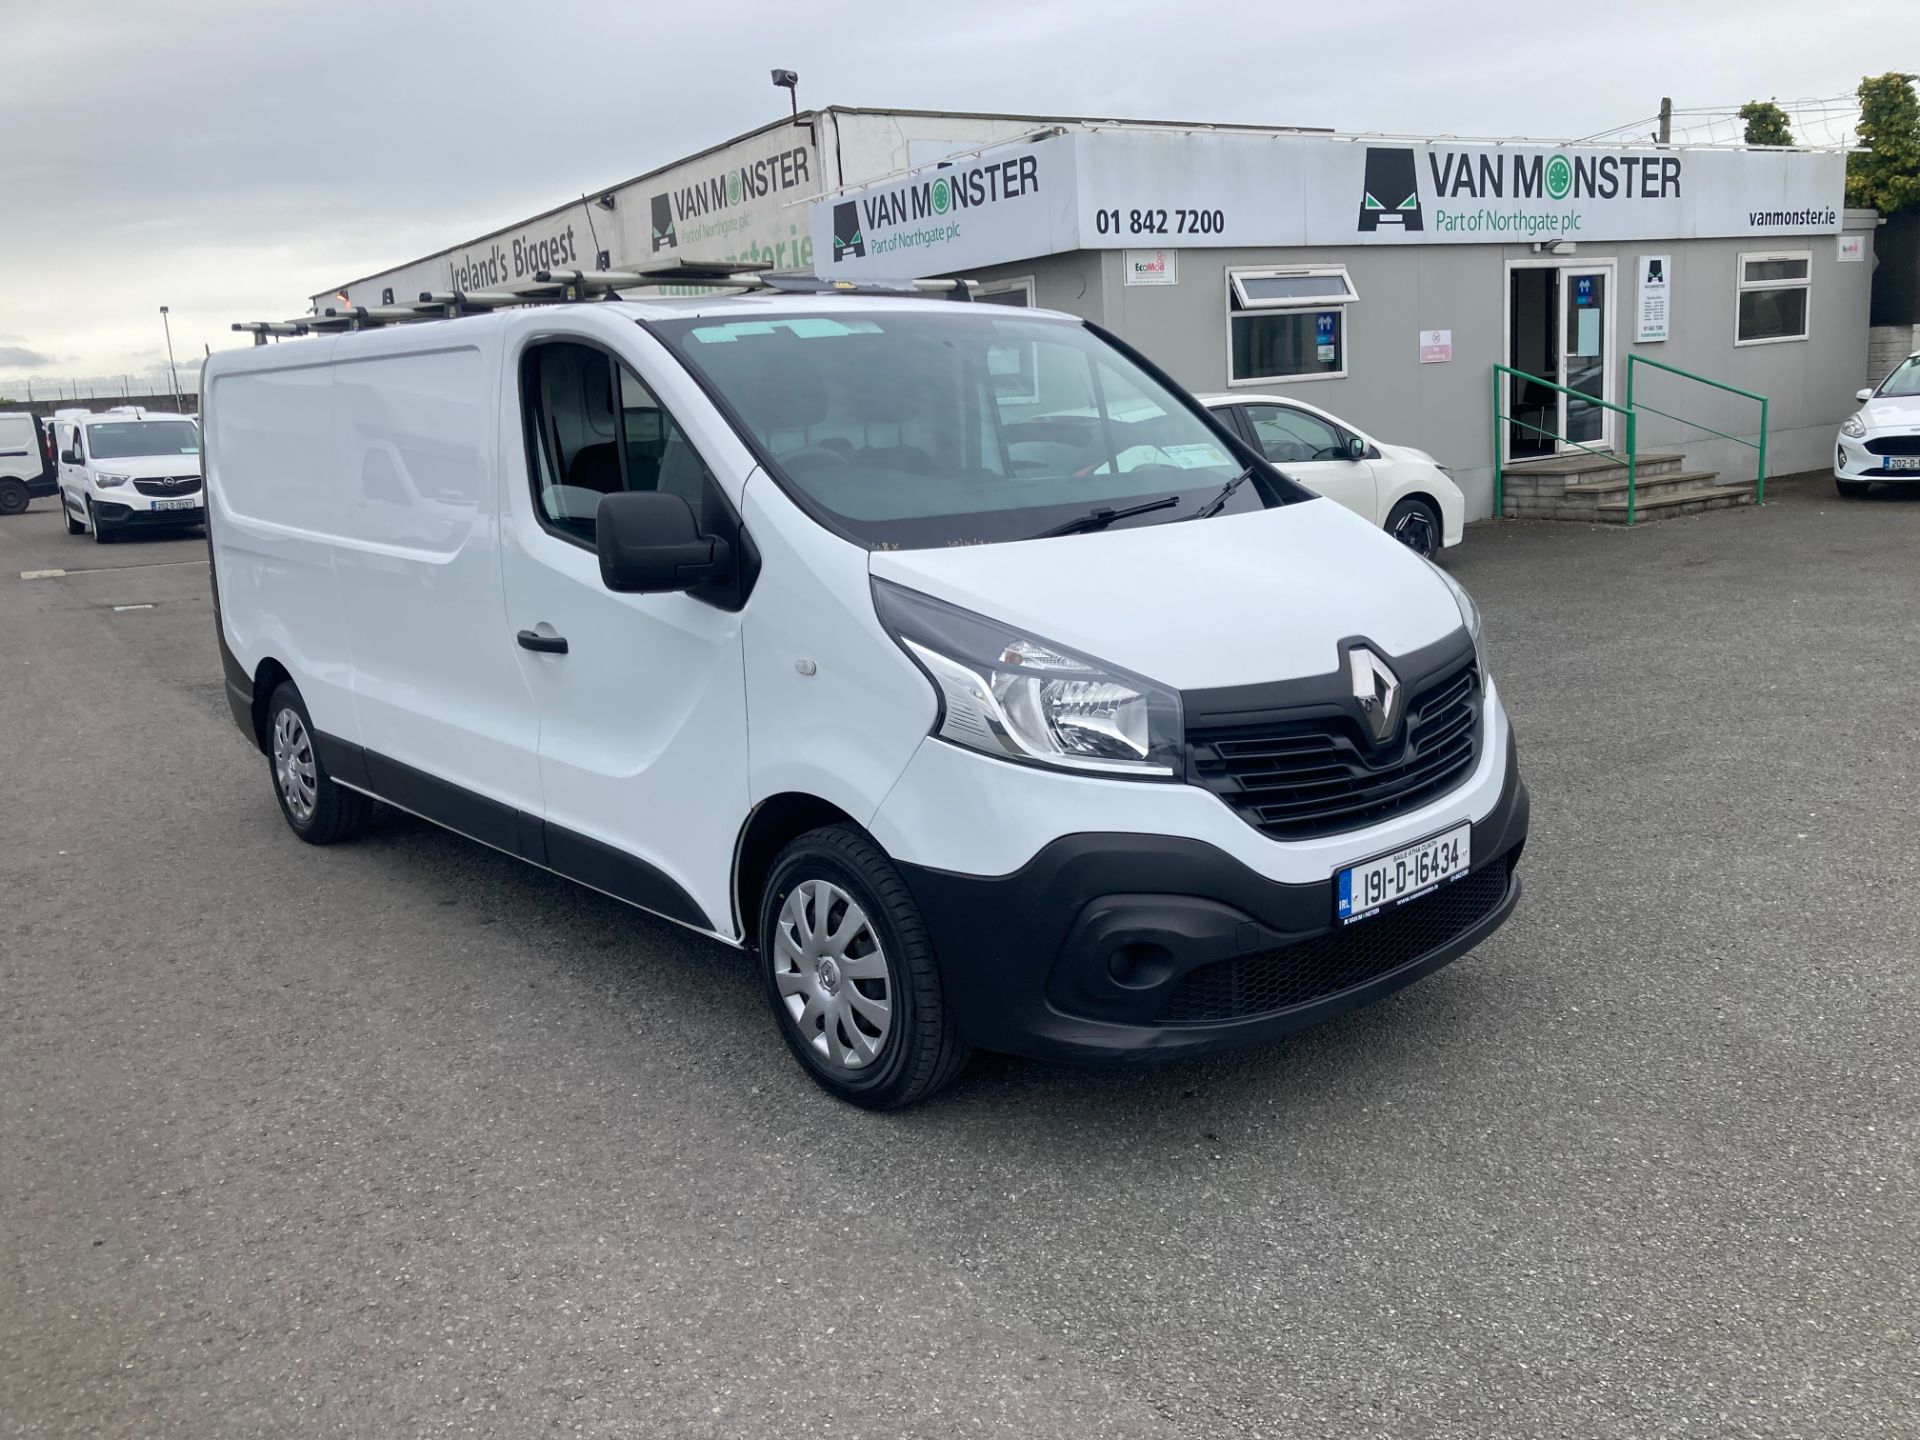 2019 Renault Trafic LL29 DCI 120 Business (191D16434)